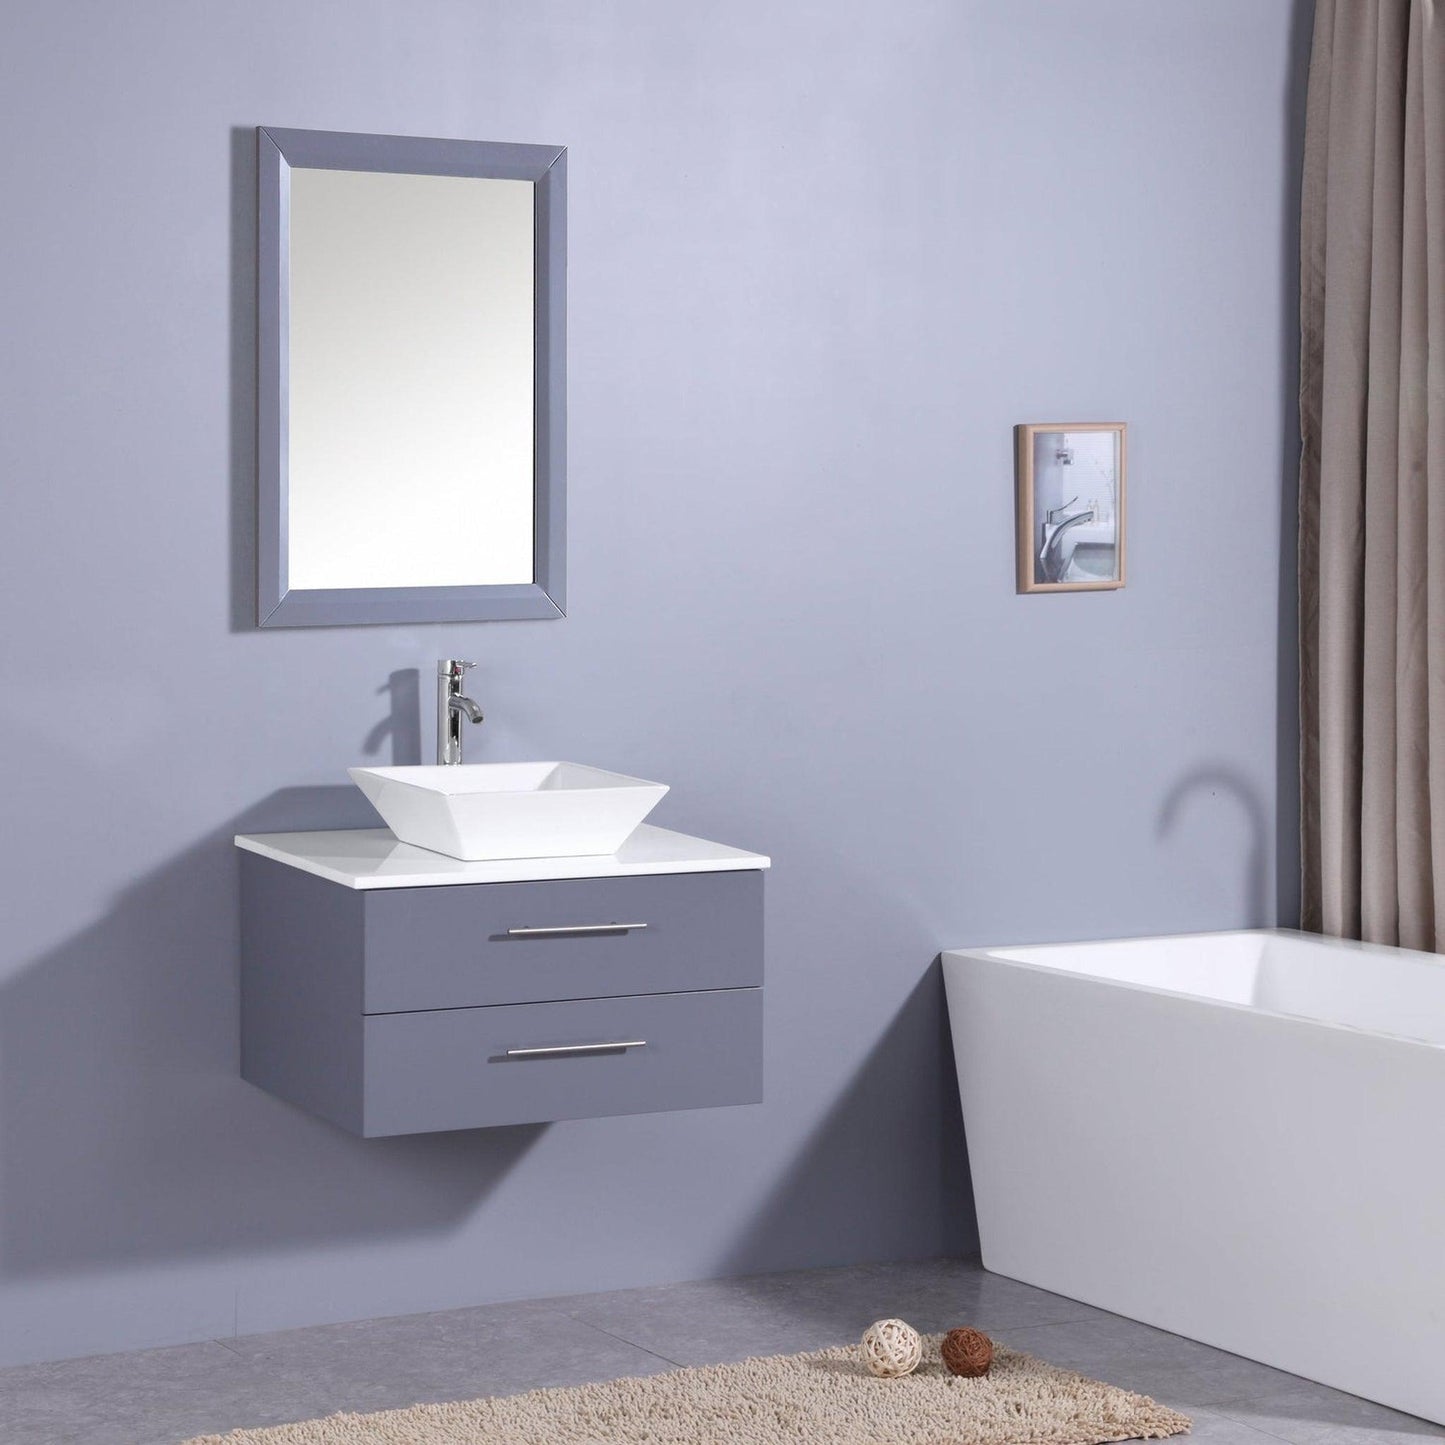 Eviva Totti Wave 30" x 16" Gray Wall-Mounted Bathroom Vanity With White Man-Made Stone Countertop and Single Porcelain Sink